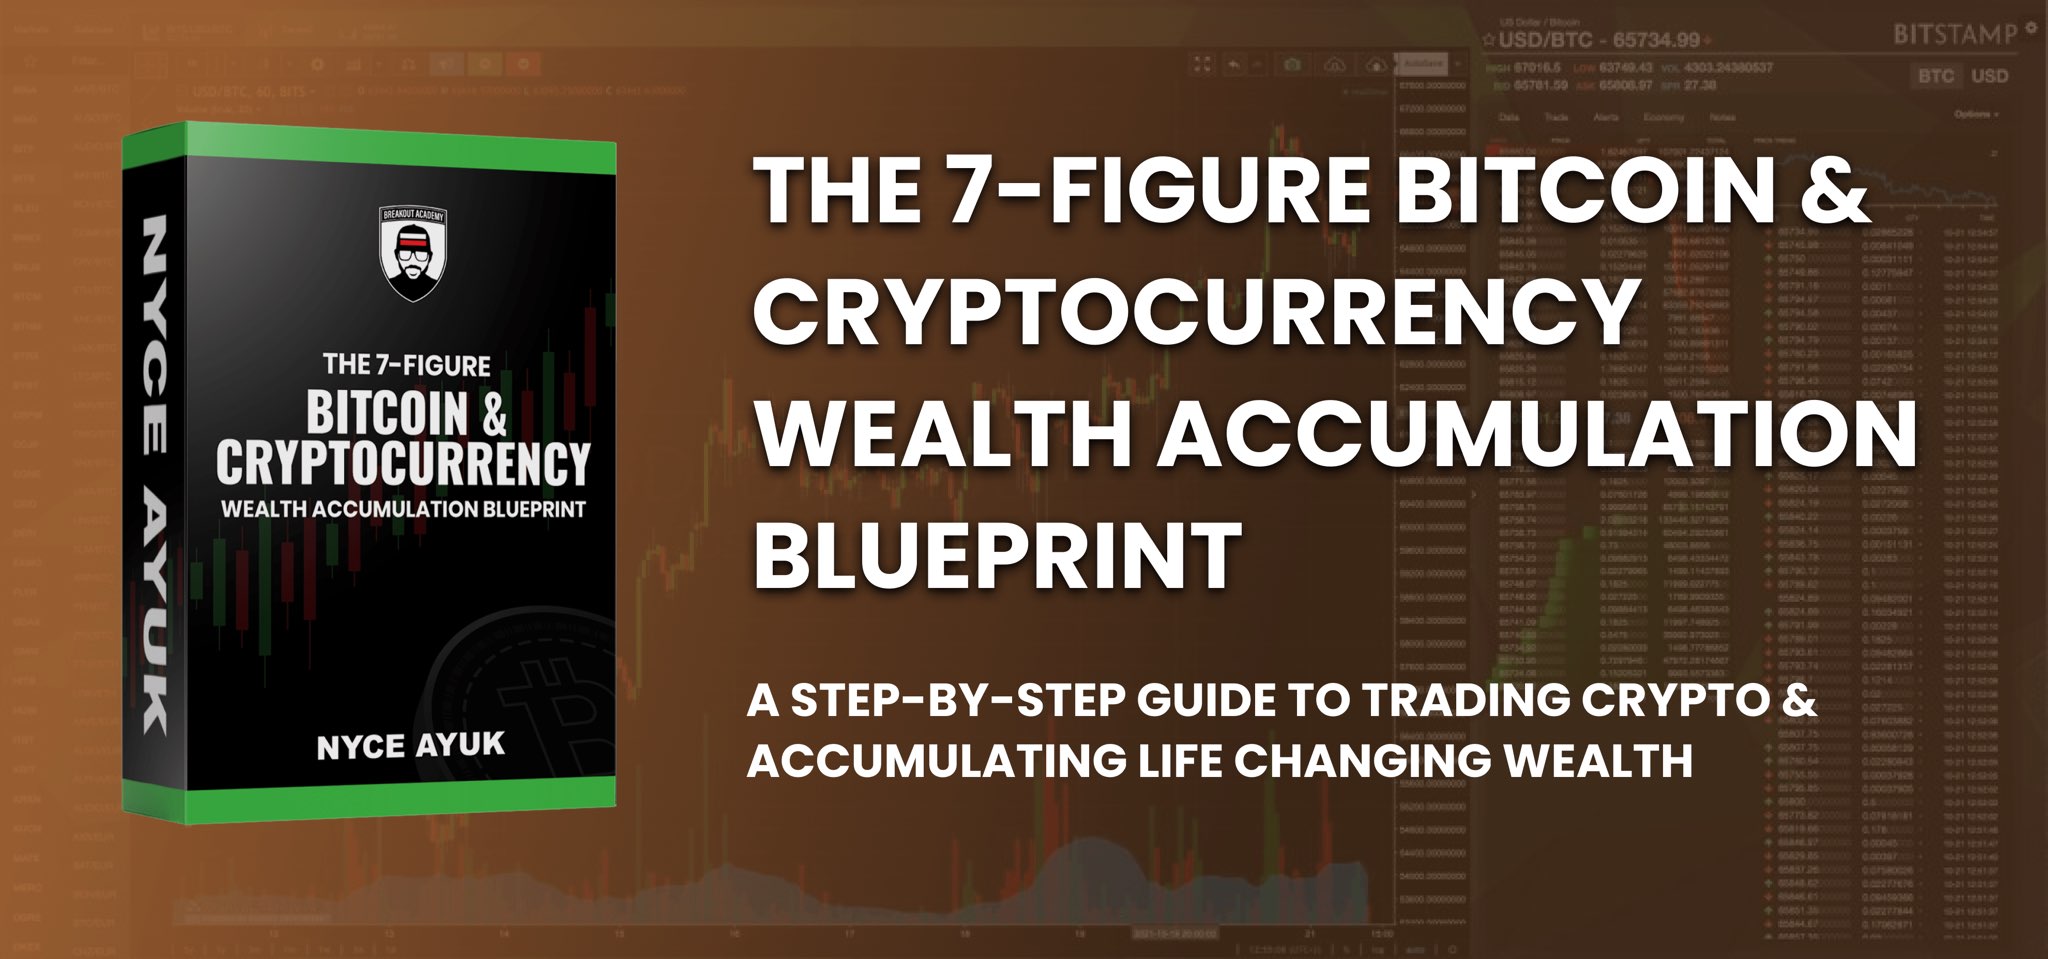 key to cryptocurrency accumulation